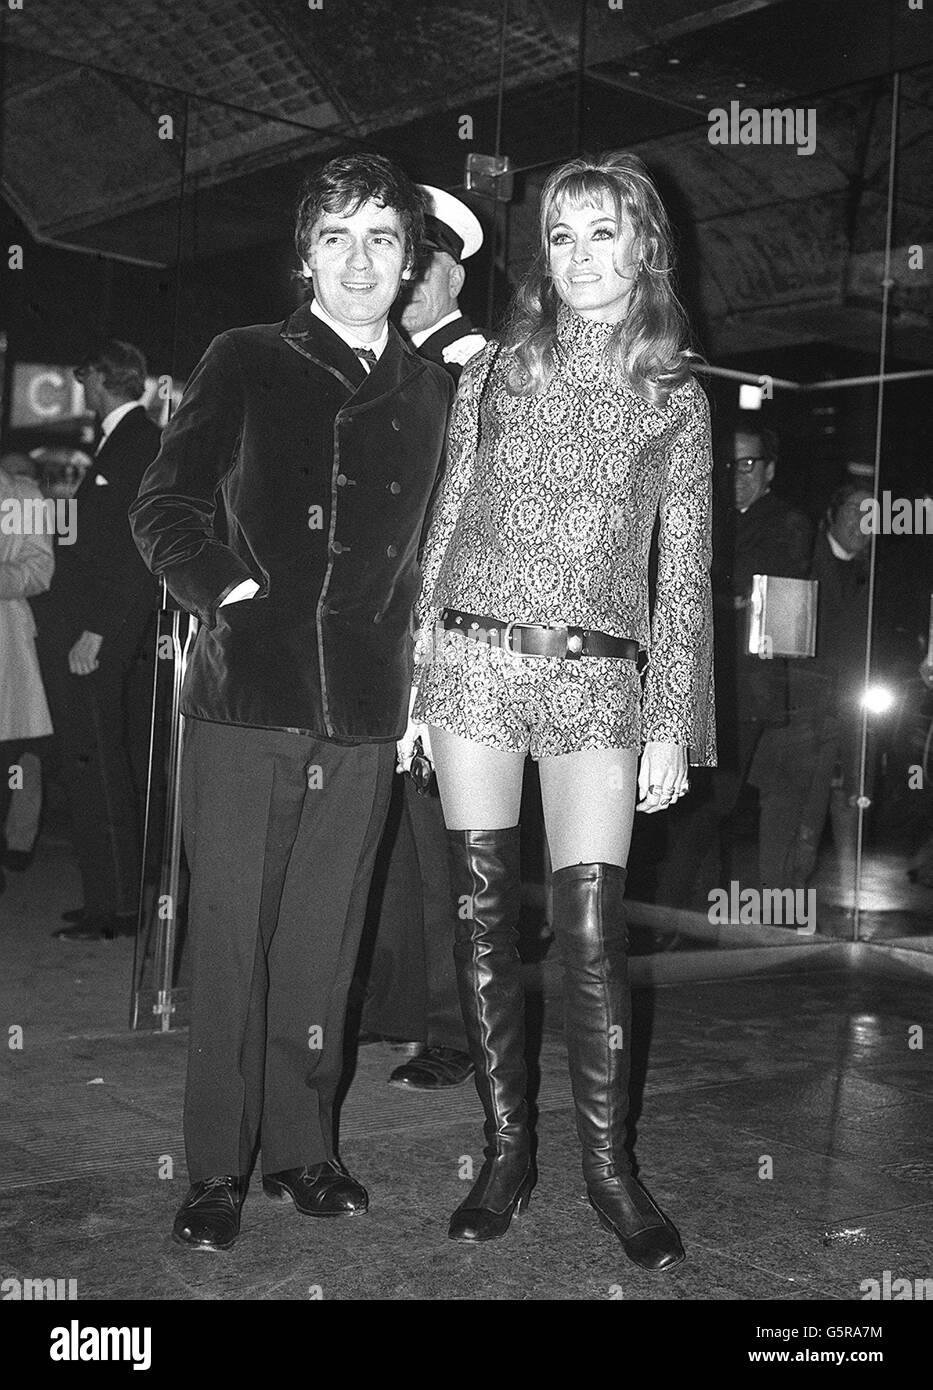 Dudley Moore und Suzy Kendall separate Stockfoto